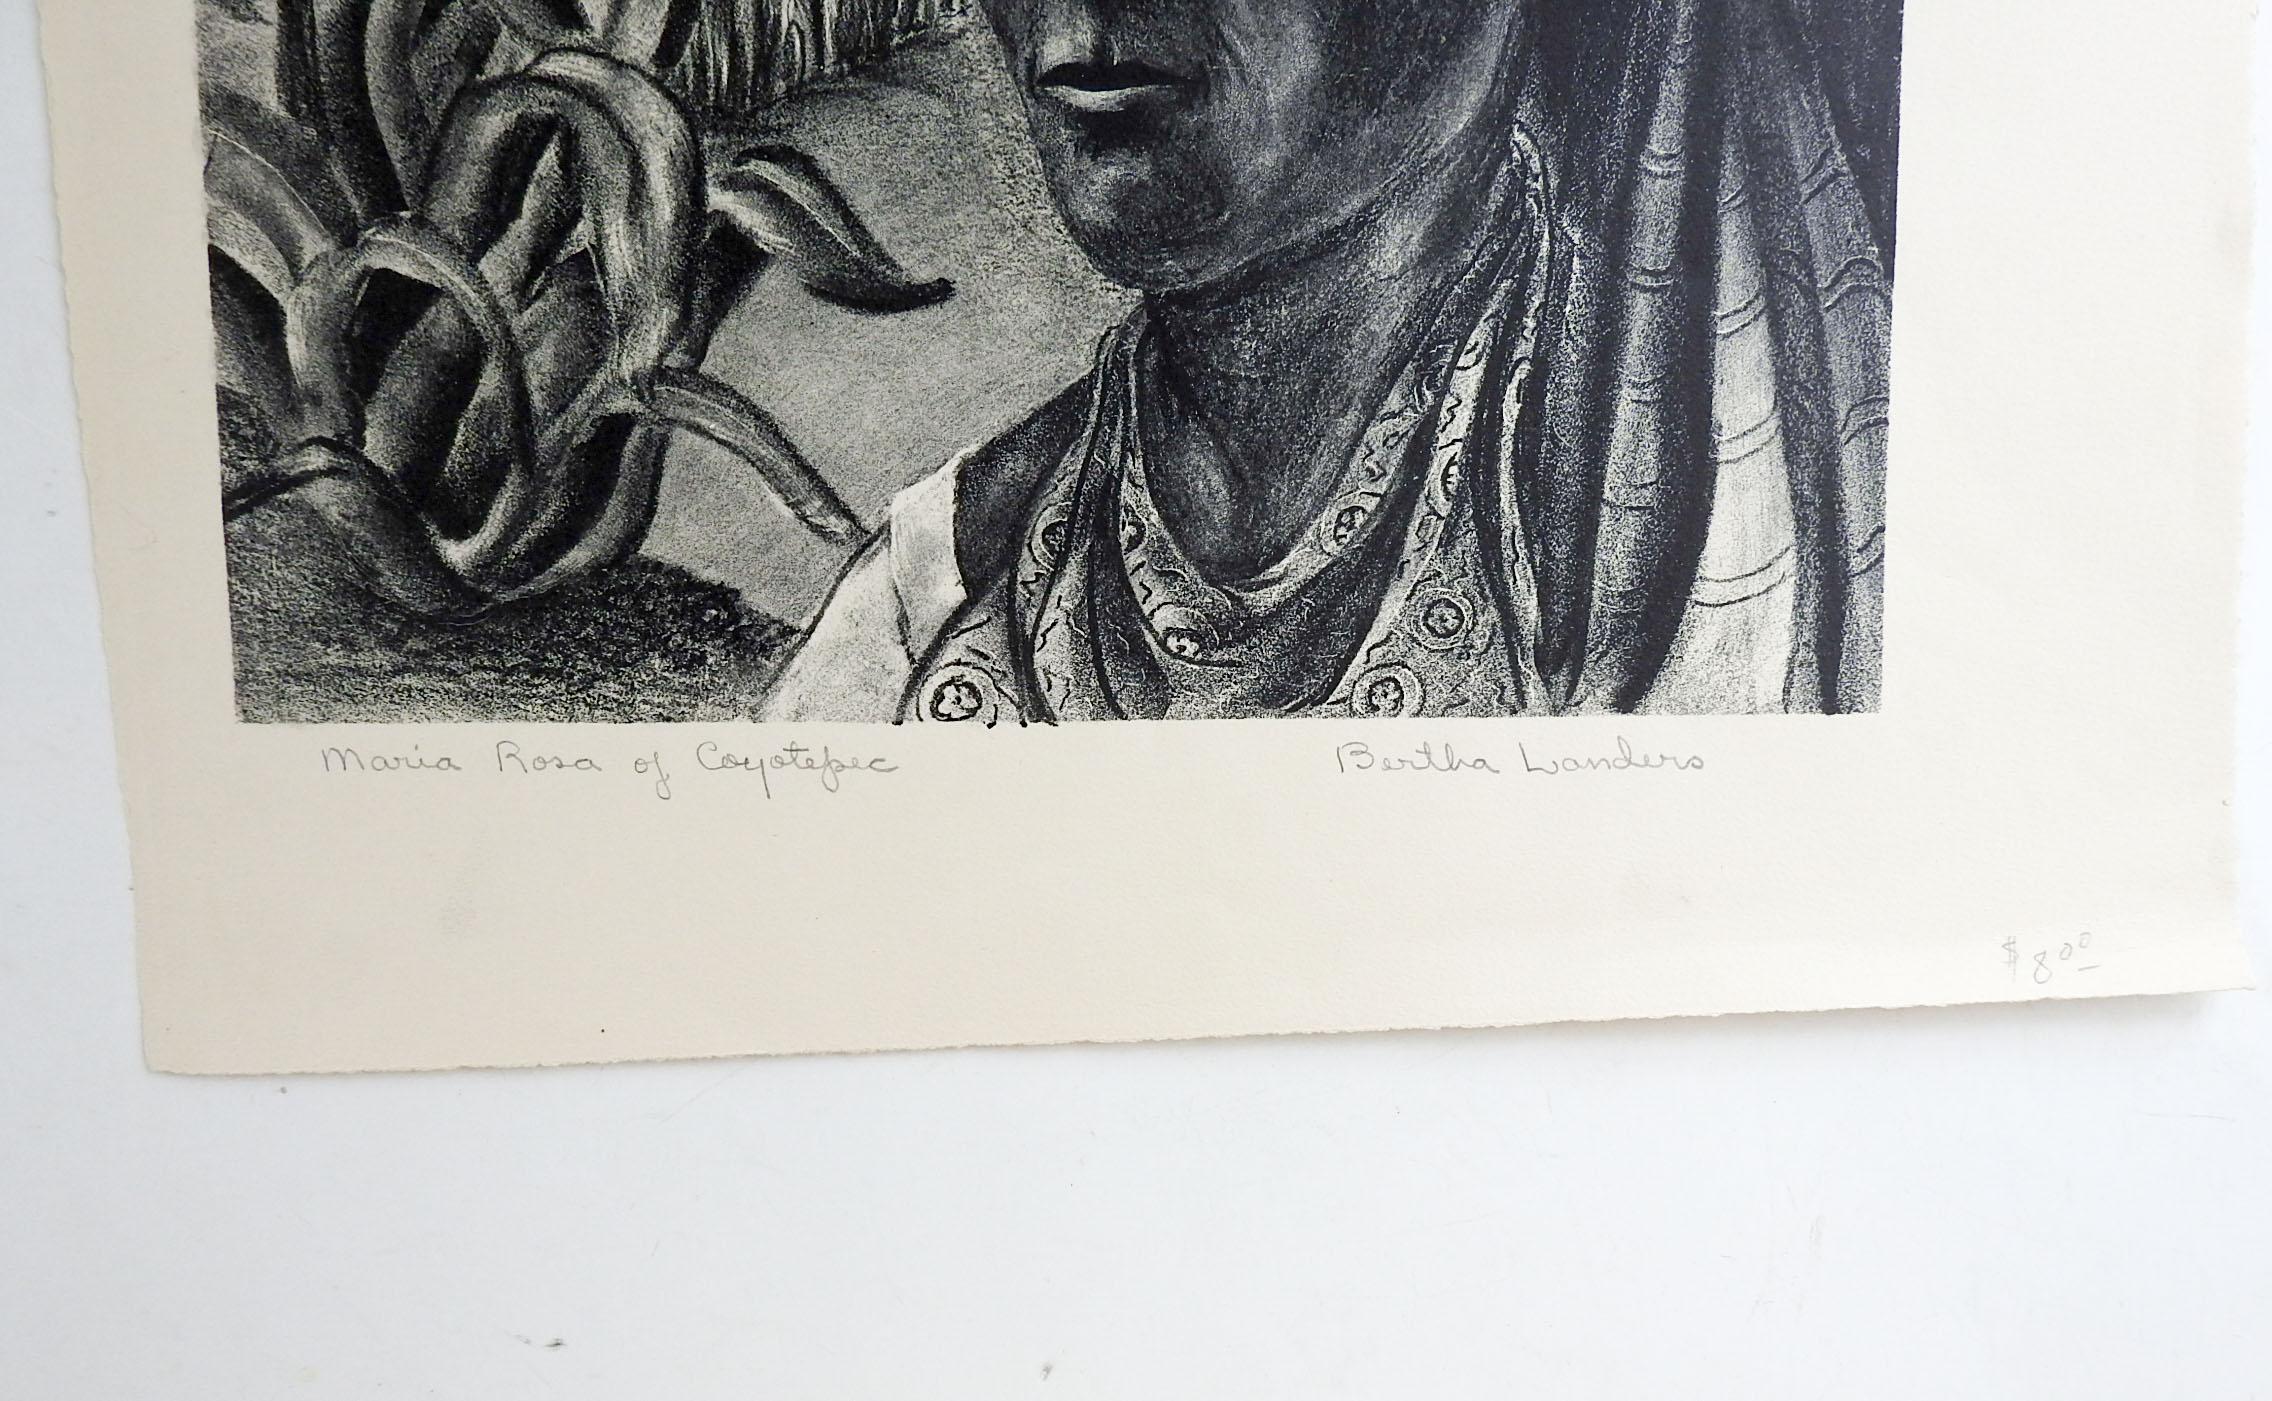 Vintage circa 1940s portrait lithograph on paper by Bertha Mae Landers (1907 - 1996) Texas. Signed and titled Maria Rosa of Coyotepec in pencil along lower margin. Unframed, age toning, print is off kilter on paper.